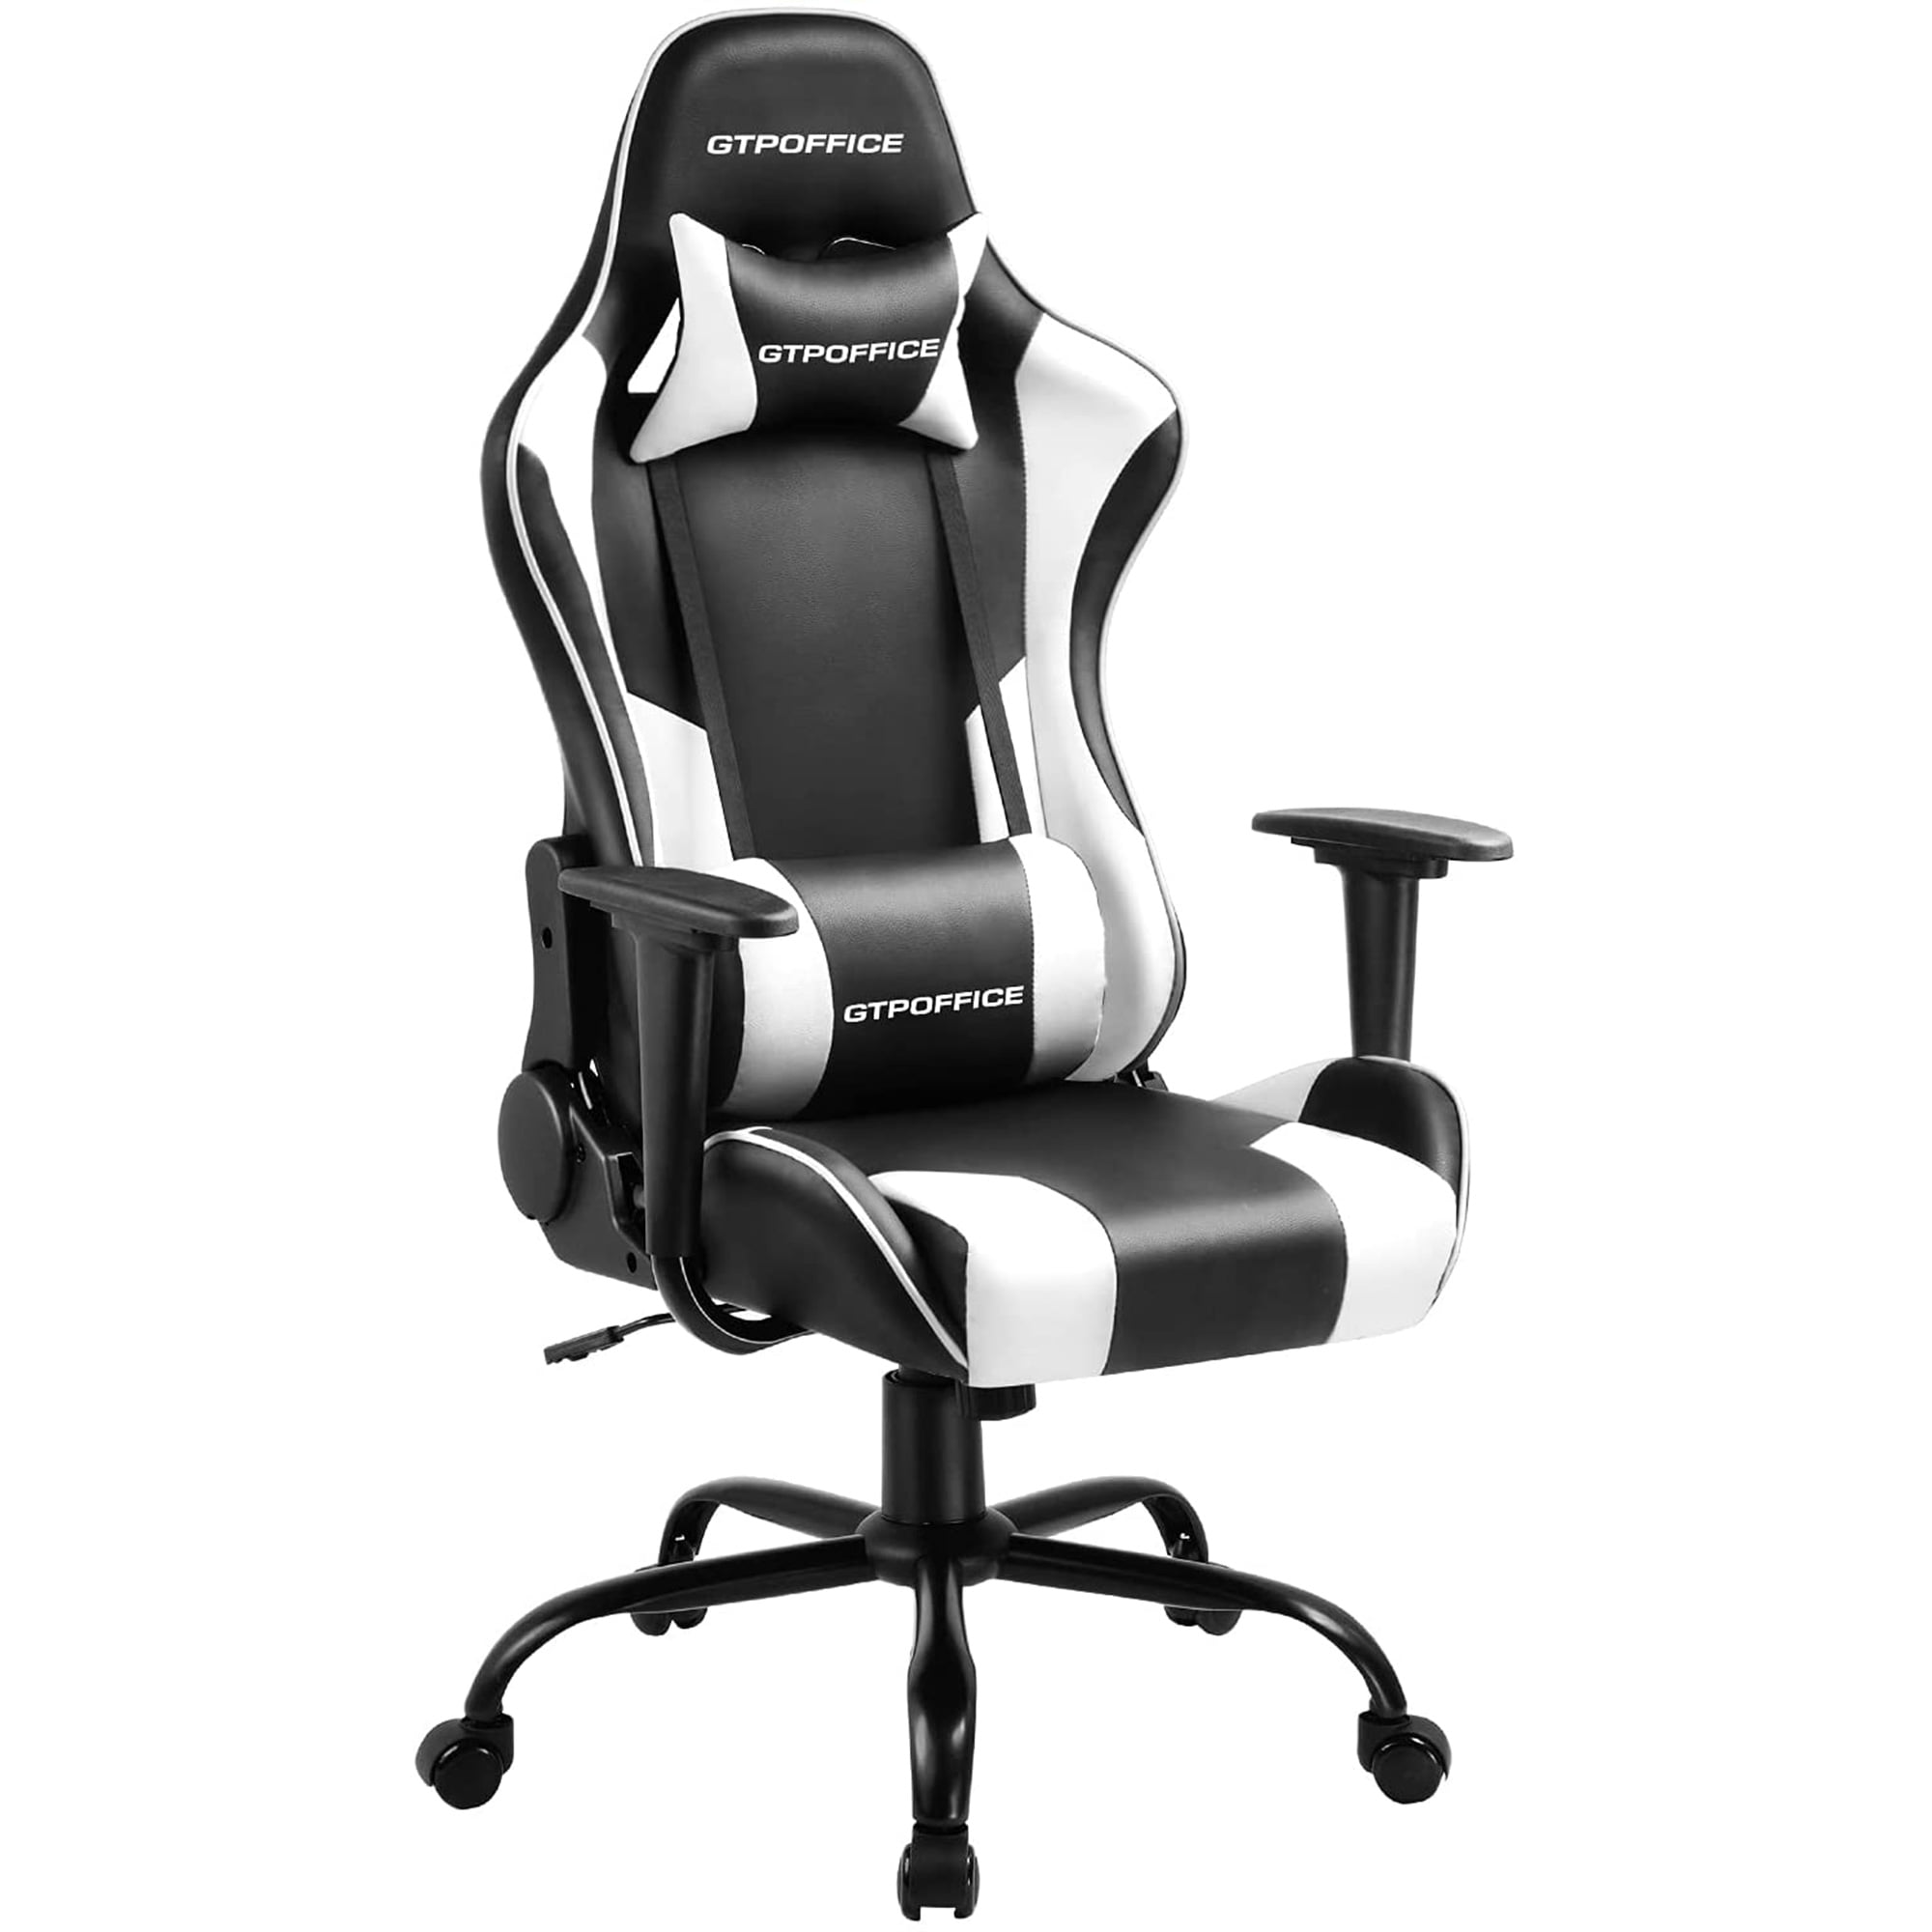 Gtracing Gaming Chair With Massage Leather Office Chair White Walmart Com Walmart Com